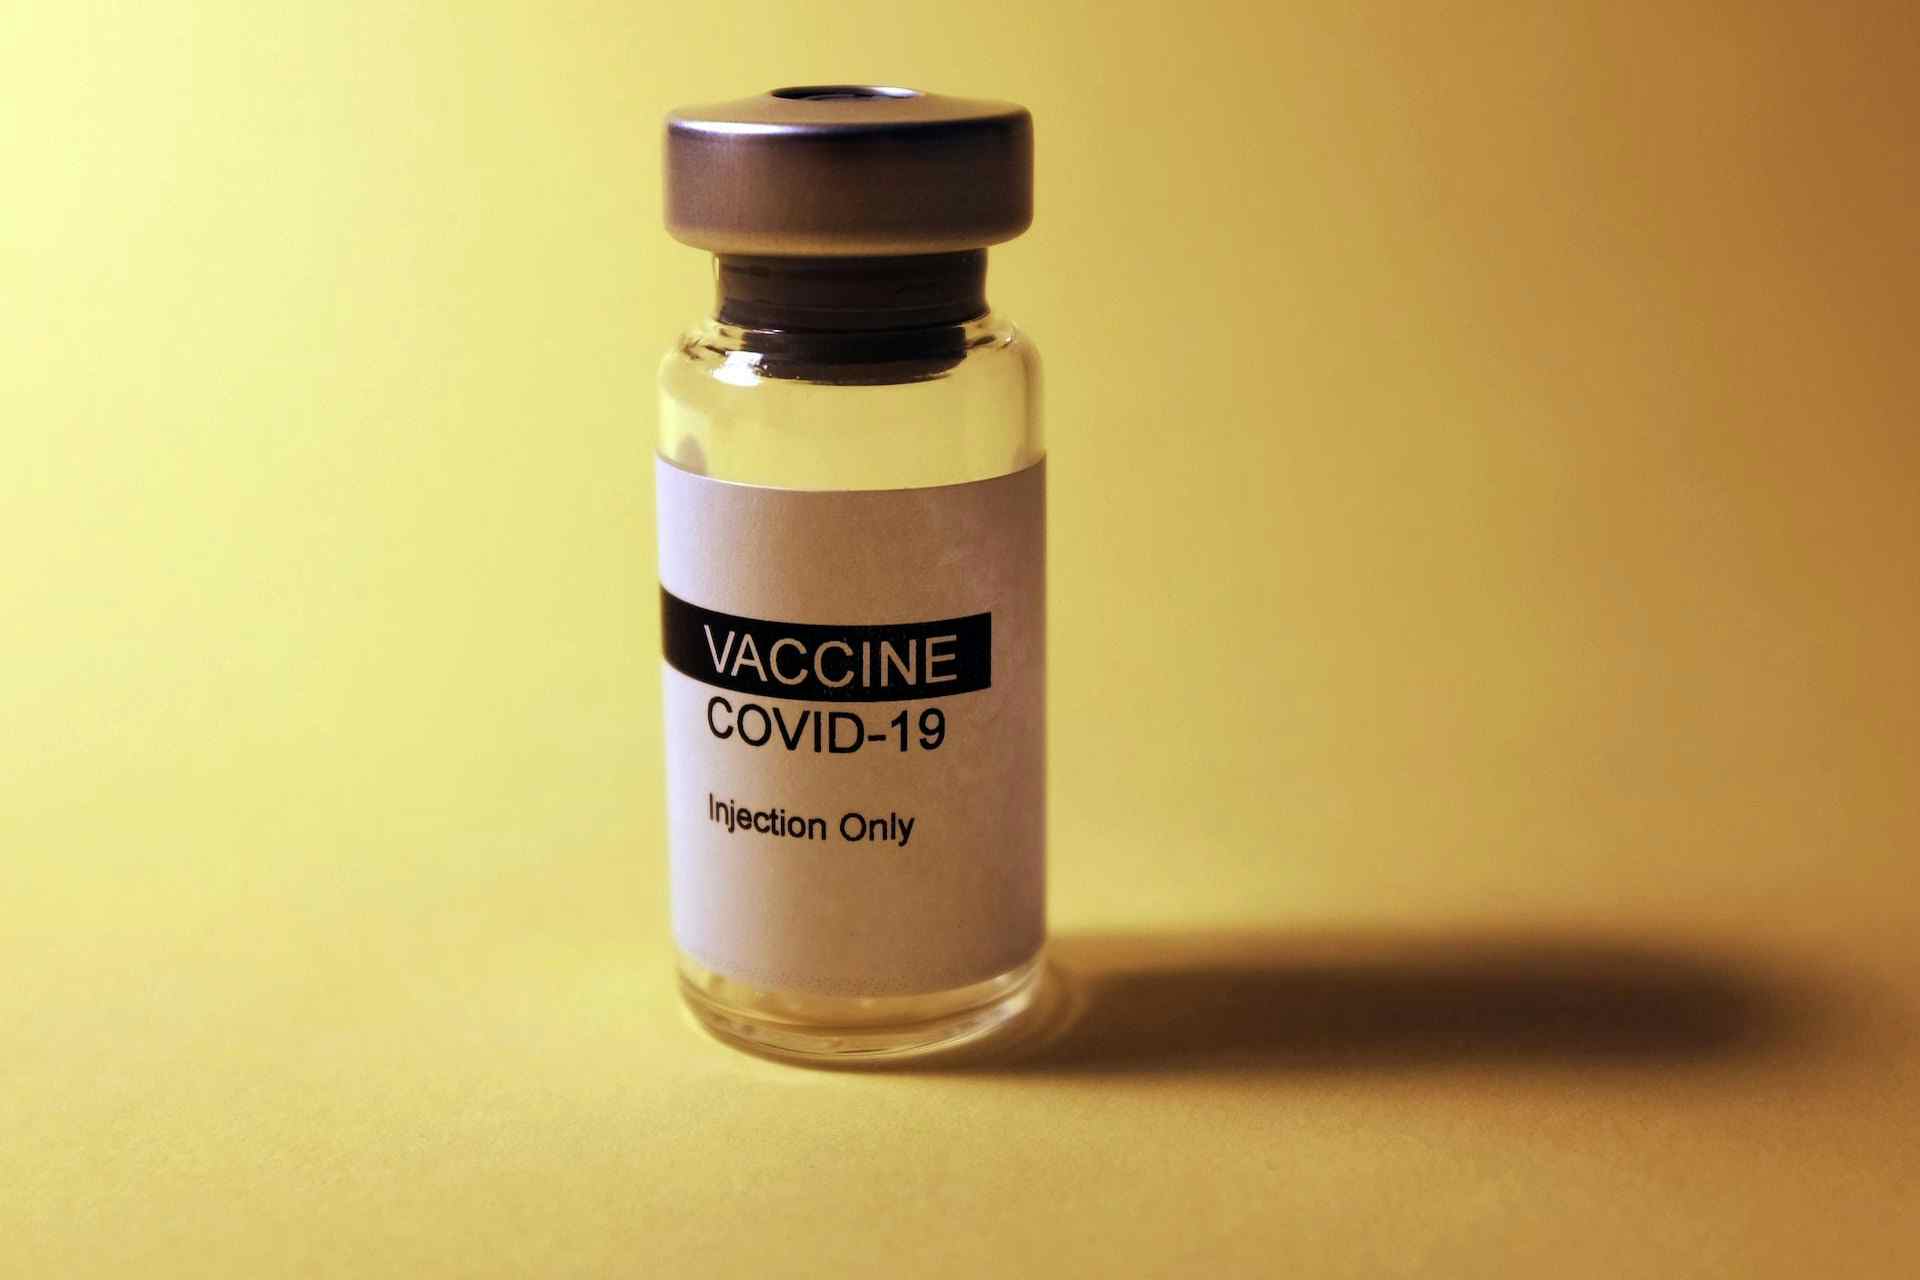 Study shows mixing Covid vaccines could increase side effects